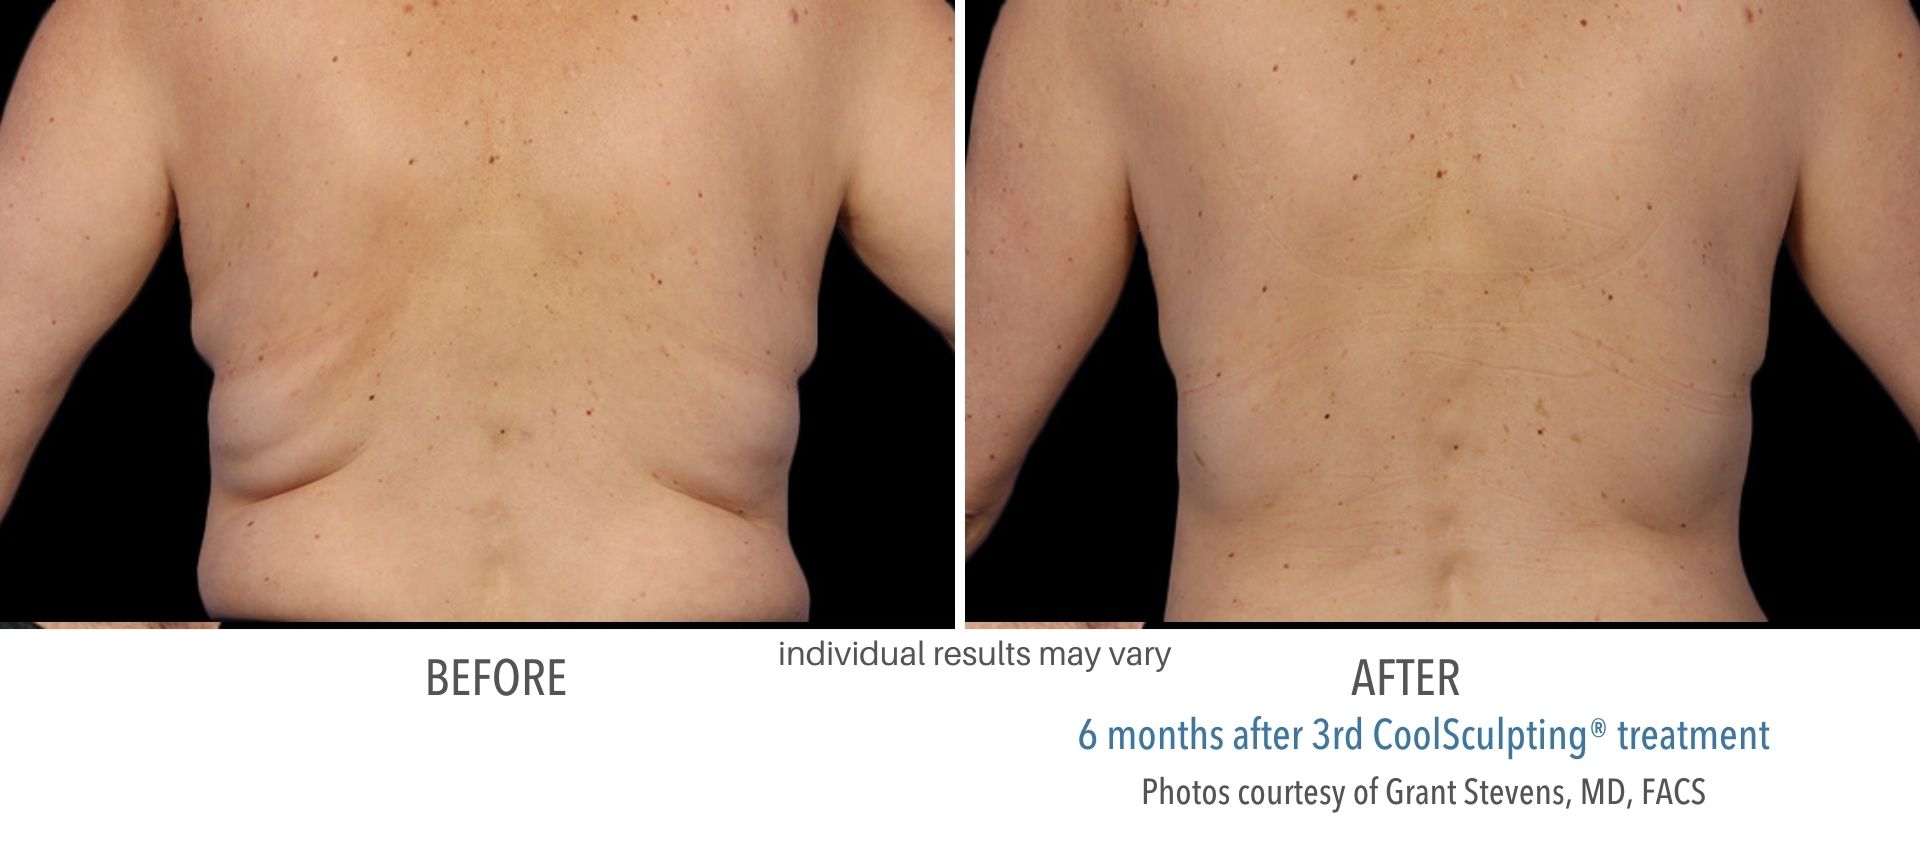 CoolSculpting Back fat treatment in Westlake, OH